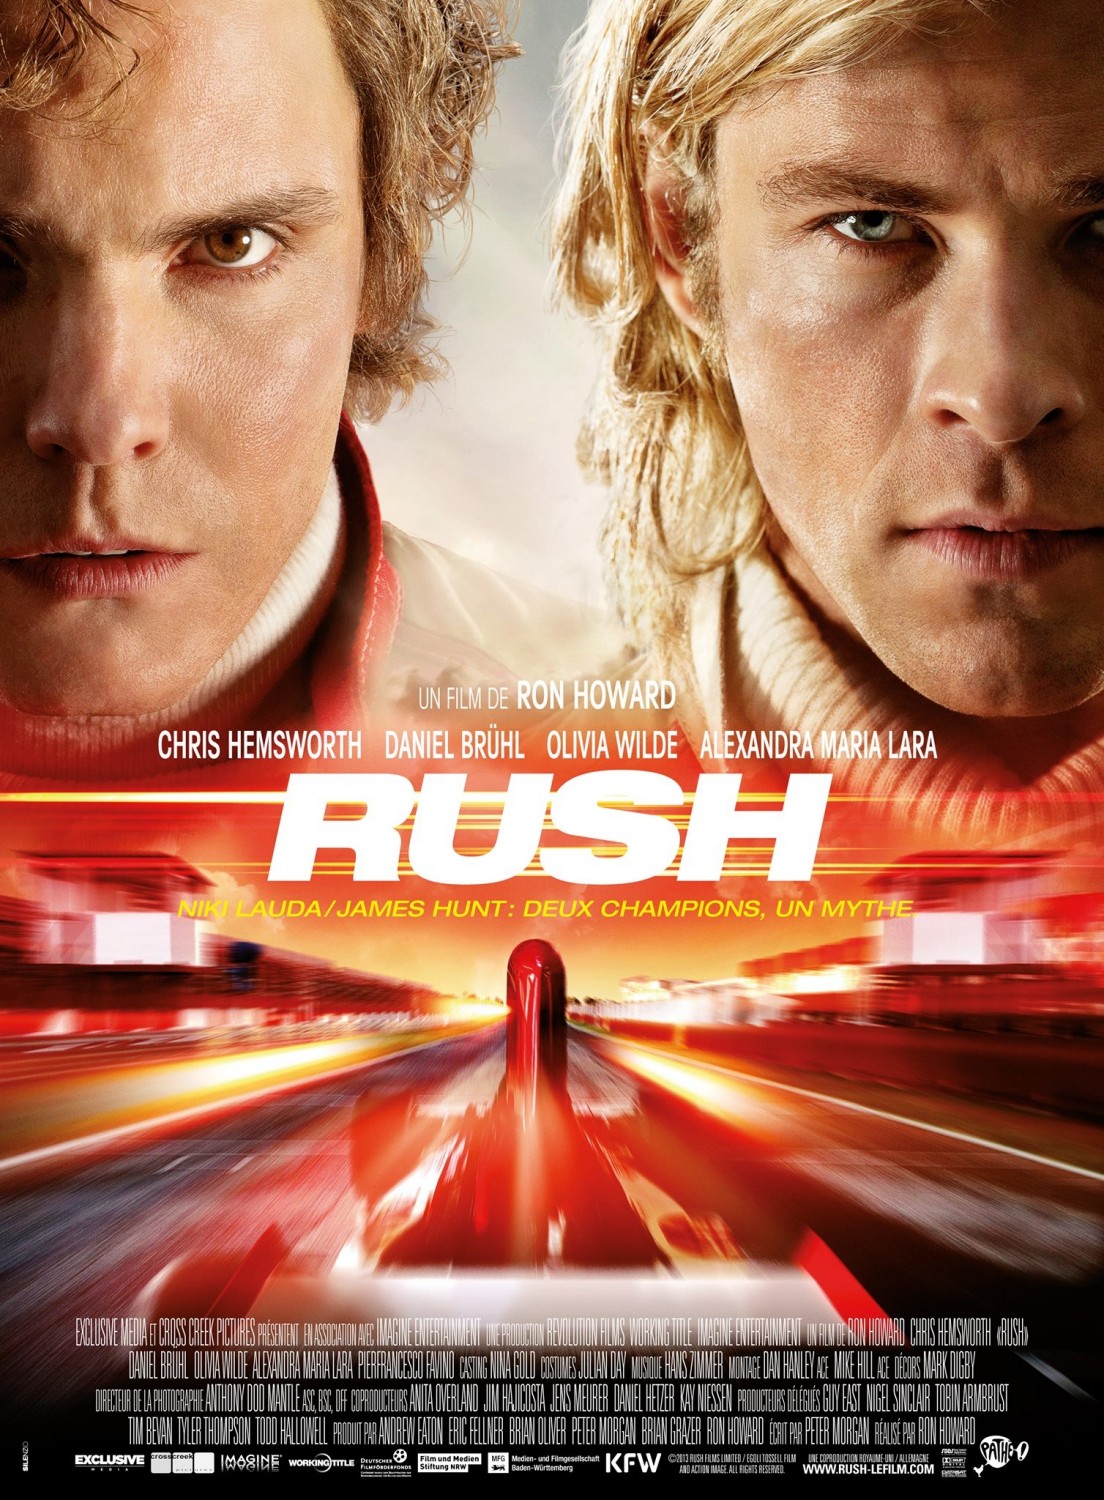 Extra Large Movie Poster Image for Rush (#8 of 14)